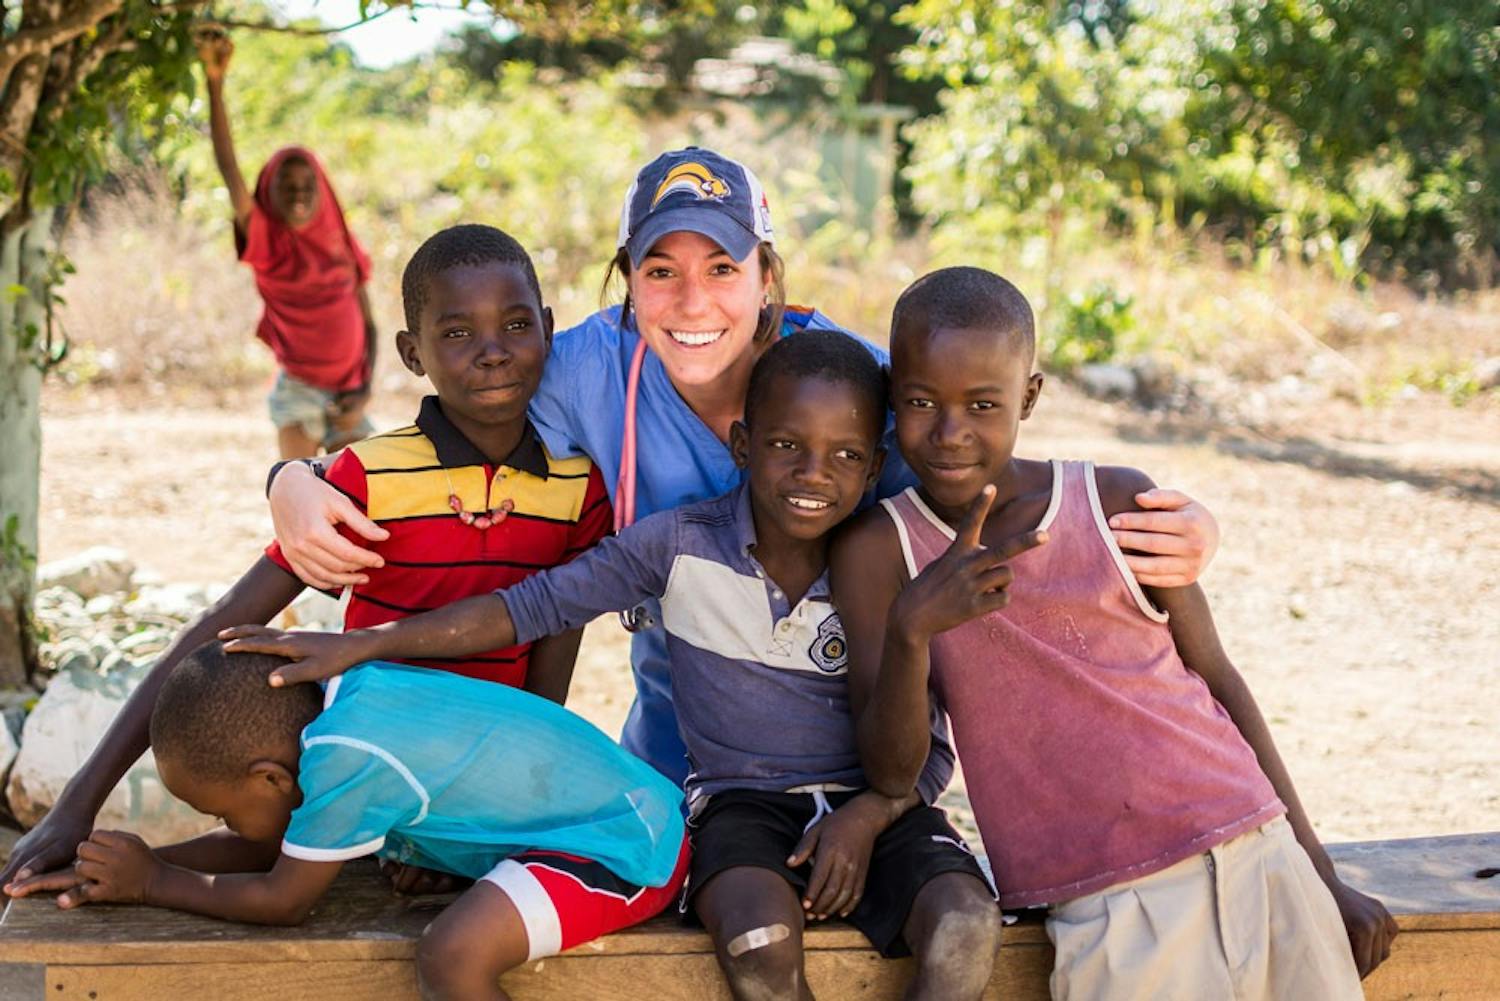 UB’s Haiti Medical Mission is a five-day medical clinic in Fontaine, Haiti. It is conducted and fundraised by UB’s first year medical students through the Friends of Fontaine organization.